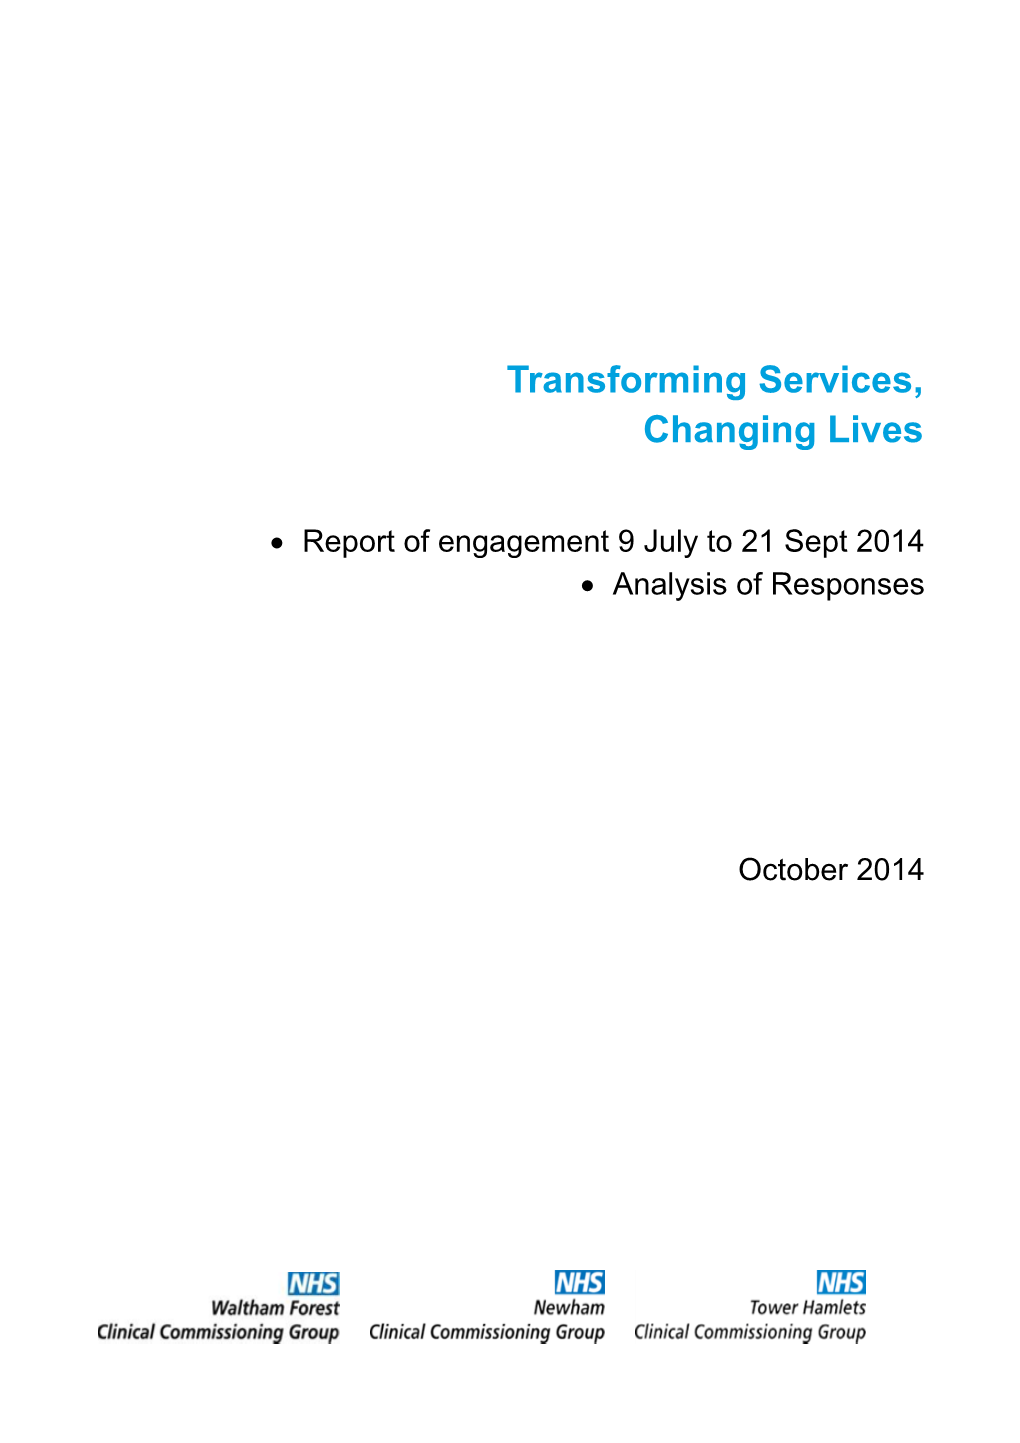 Report of Engagement 9 July to 21 Sept 2014  Analysis of Responses